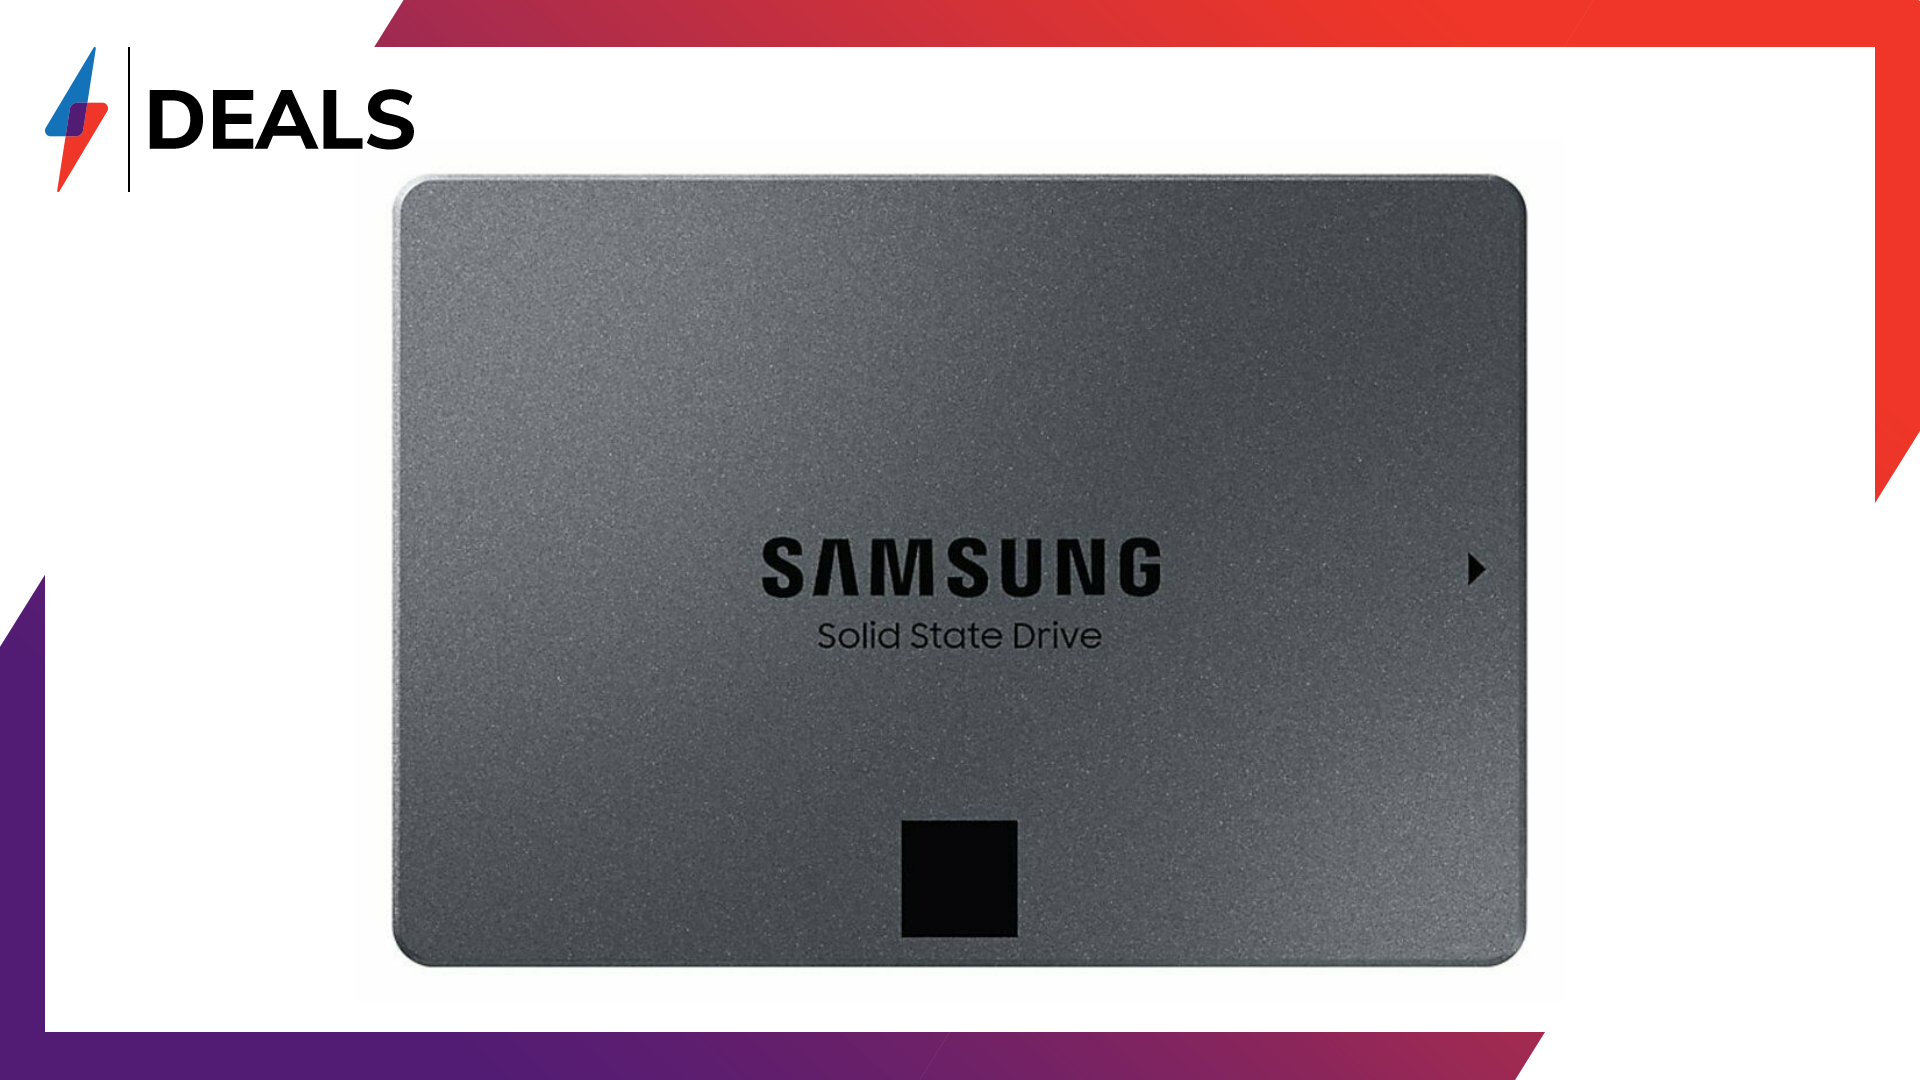 Expand your storage: get the Samsung 860 QVO 1TB SSD for just £79.99